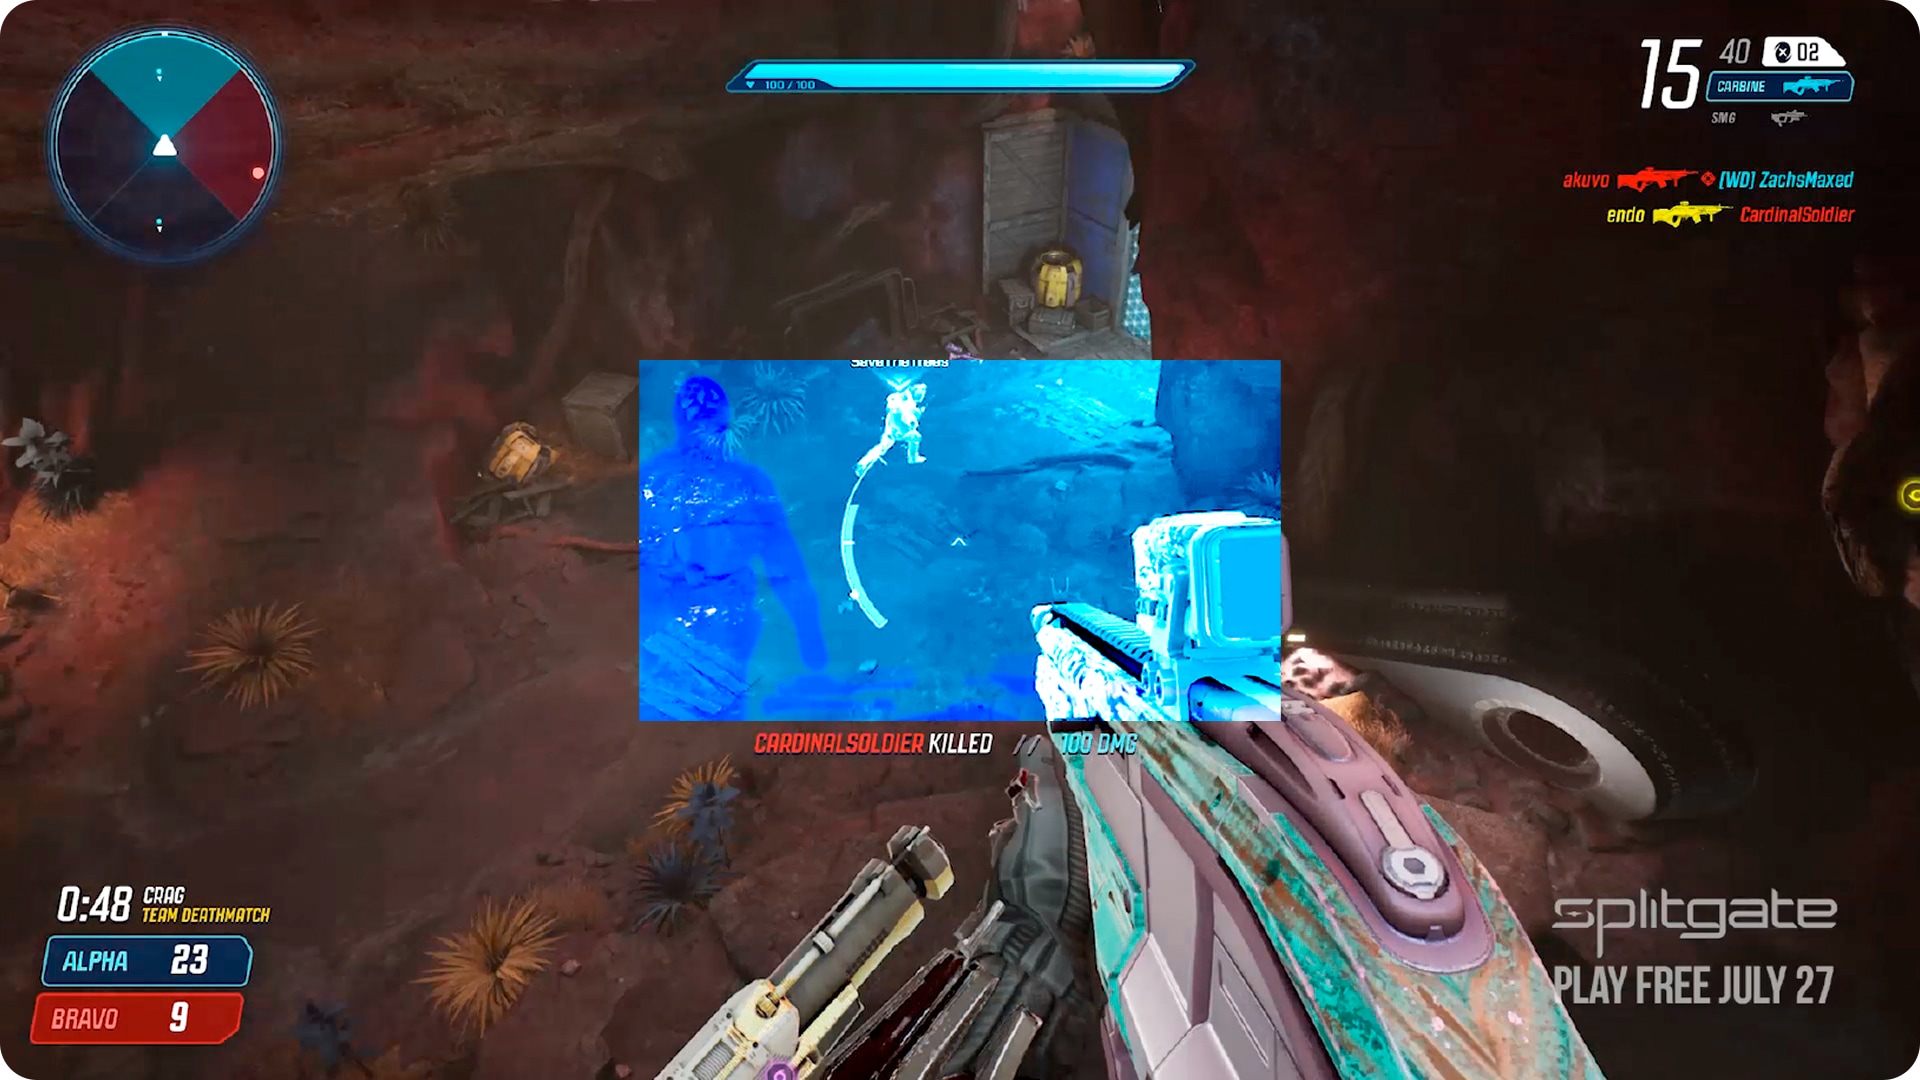 Screenshot of Spitgame video game